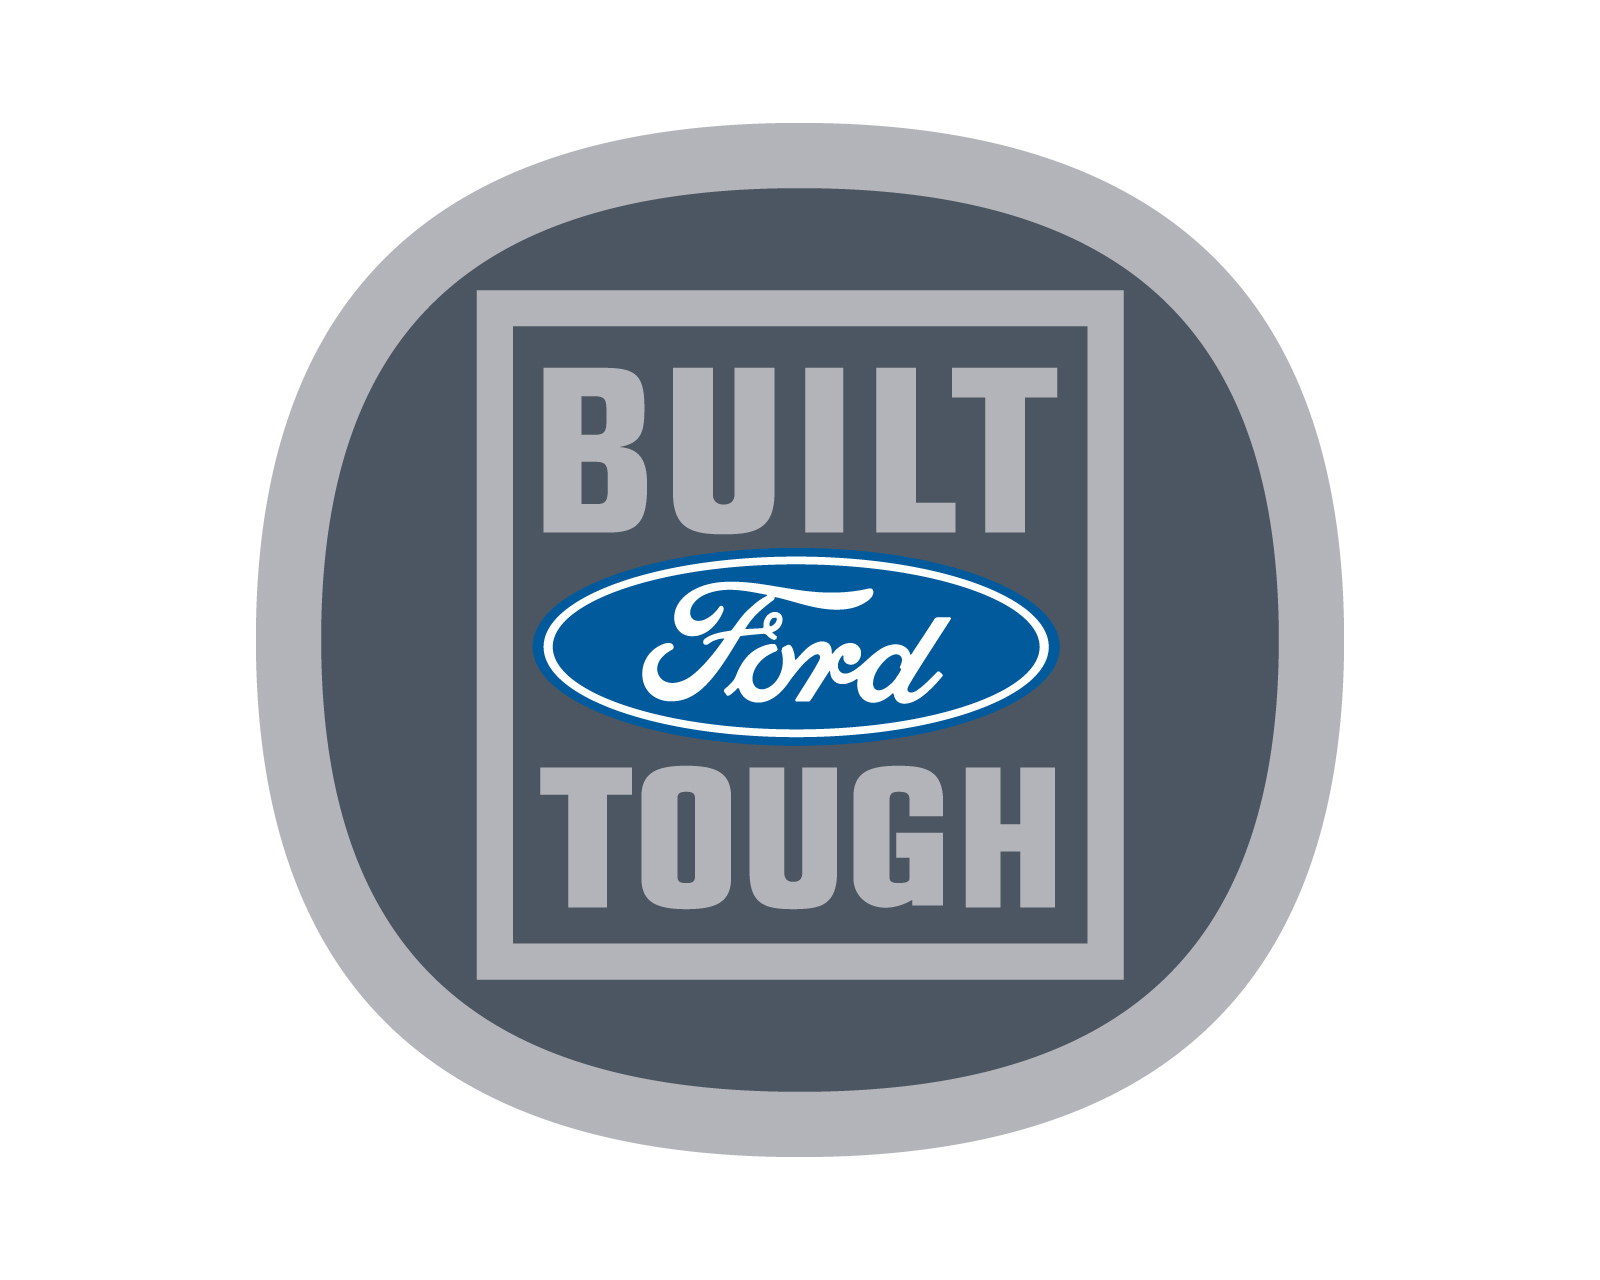 As Mike Naughton Ford Amp Values Way